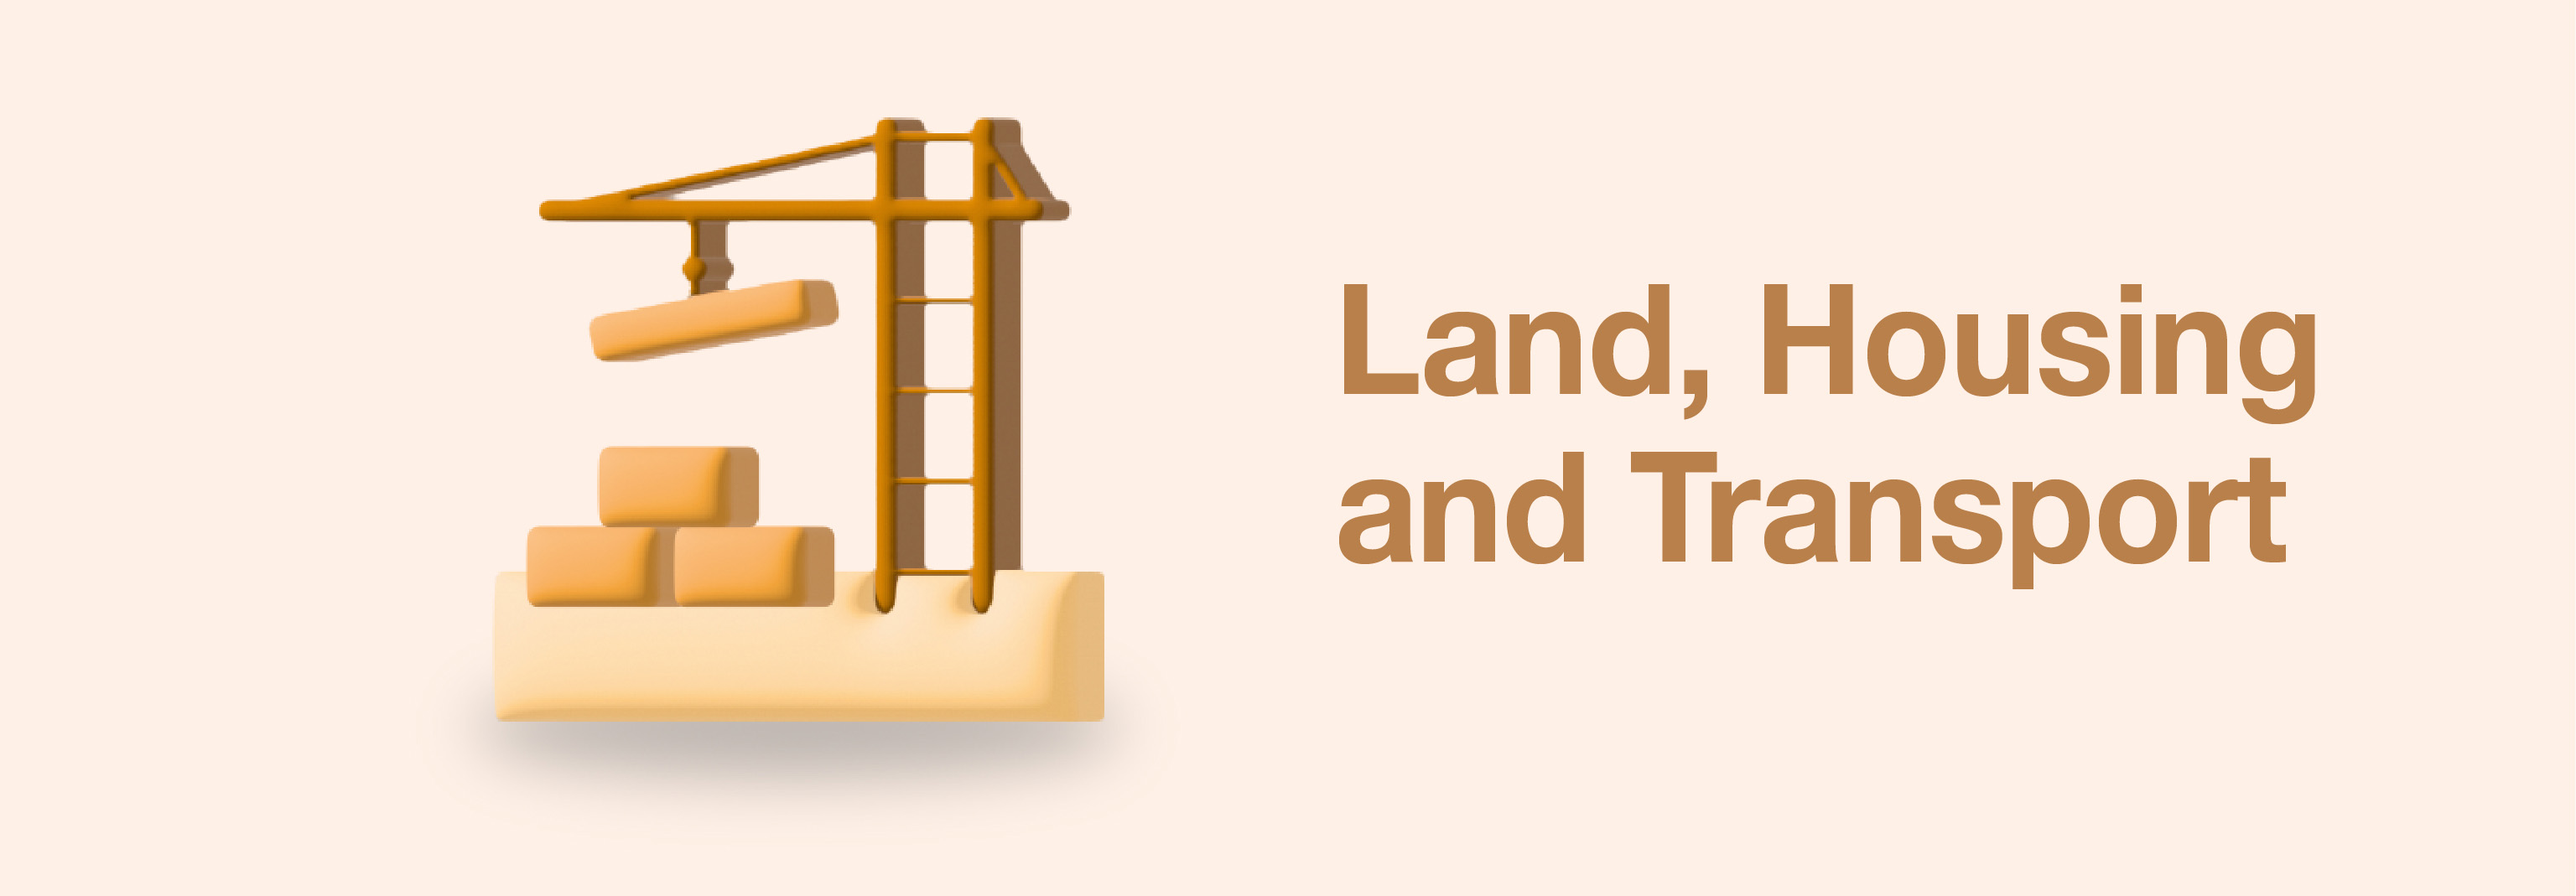 Land, Housing and Transport